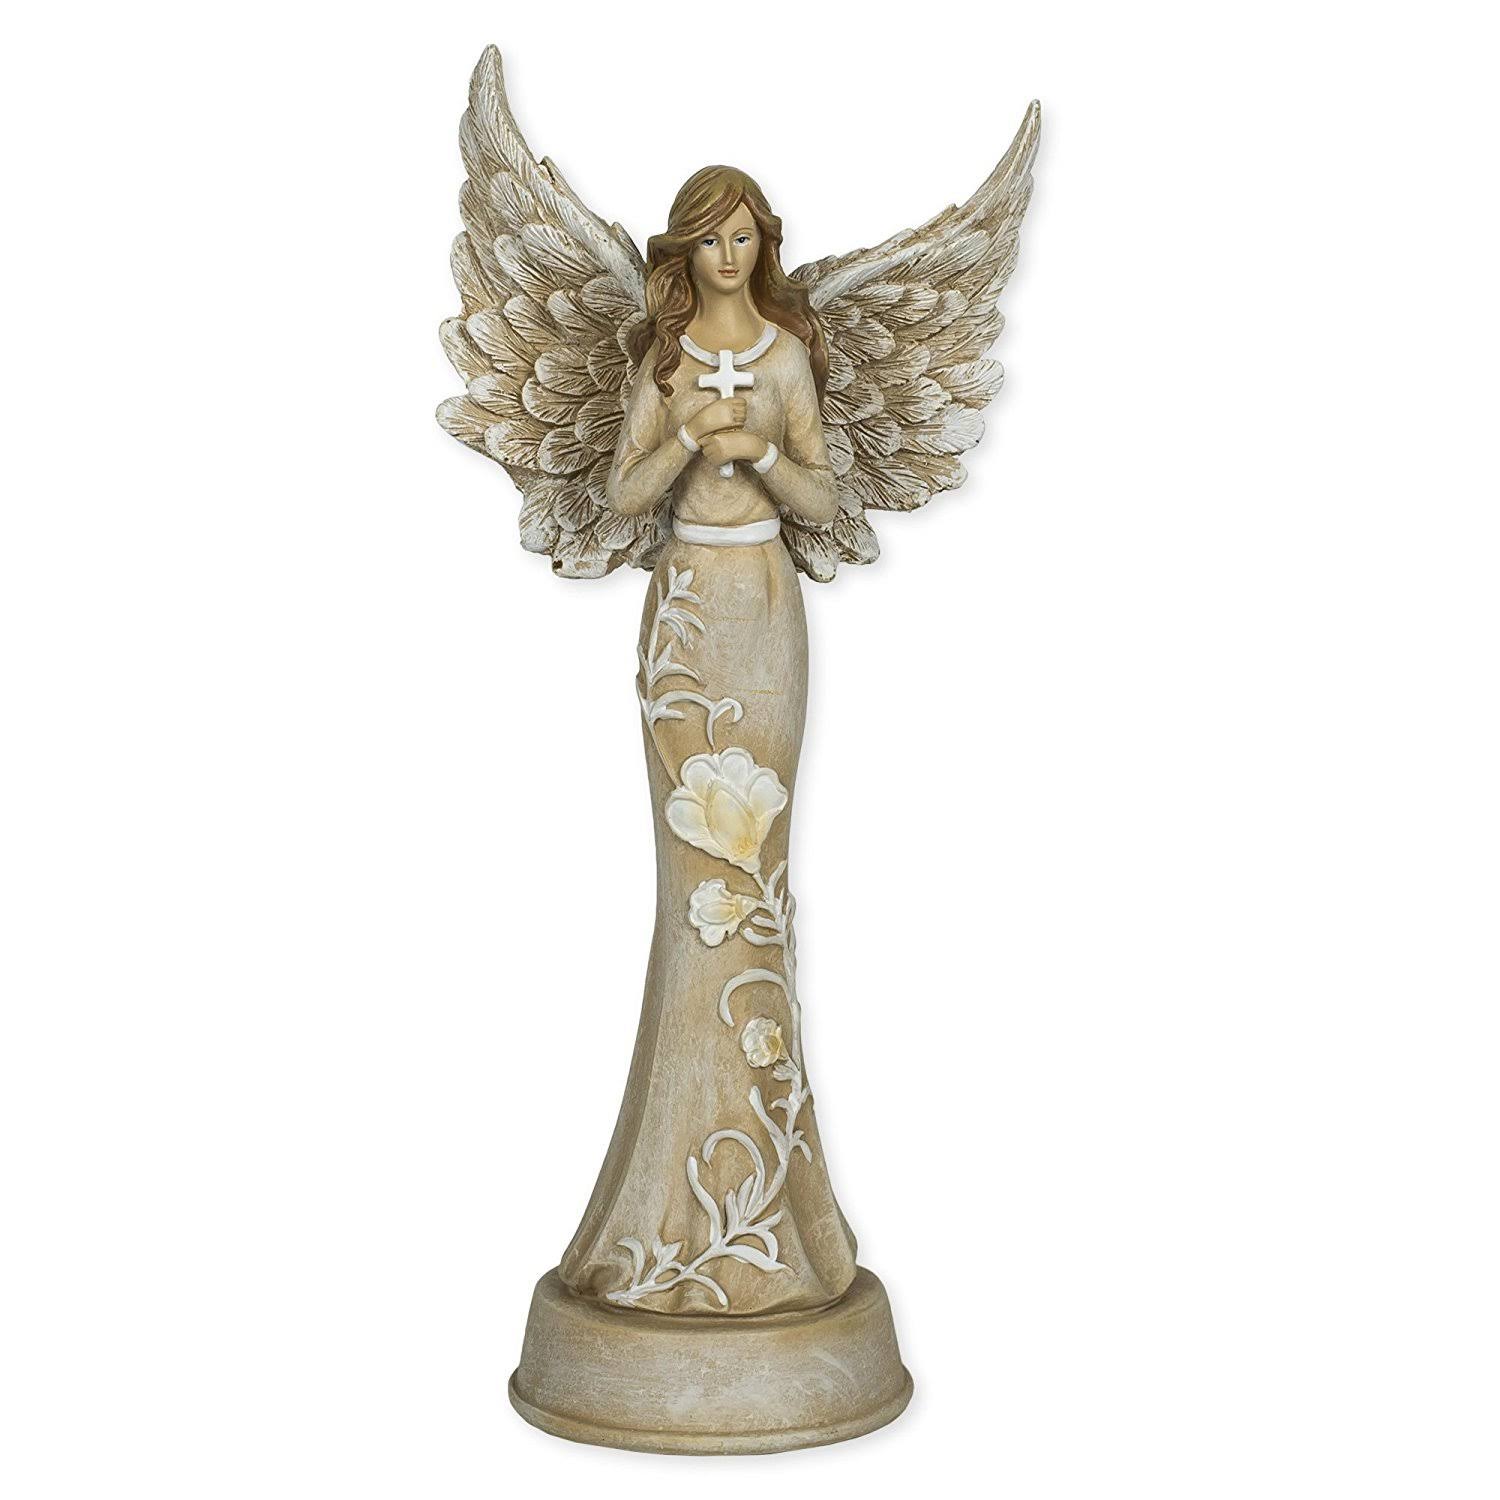 Roman Collectible and Figurine Memorial Angel Figurine One-Size